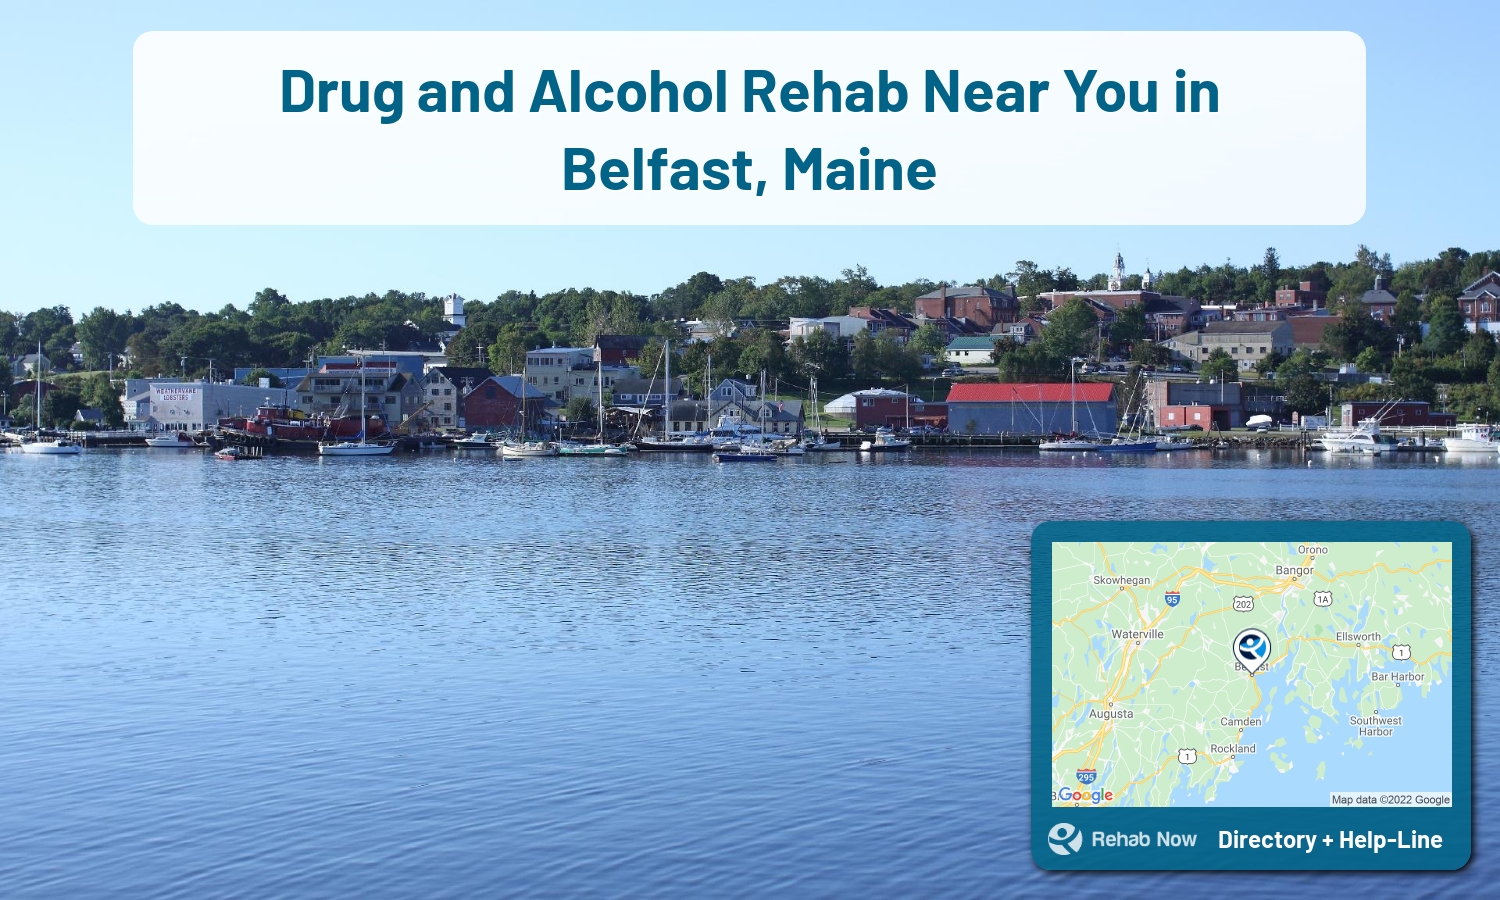 List of alcohol and drug treatment centers near you in Belfast, Maine. Research certifications, programs, methods, pricing, and more.